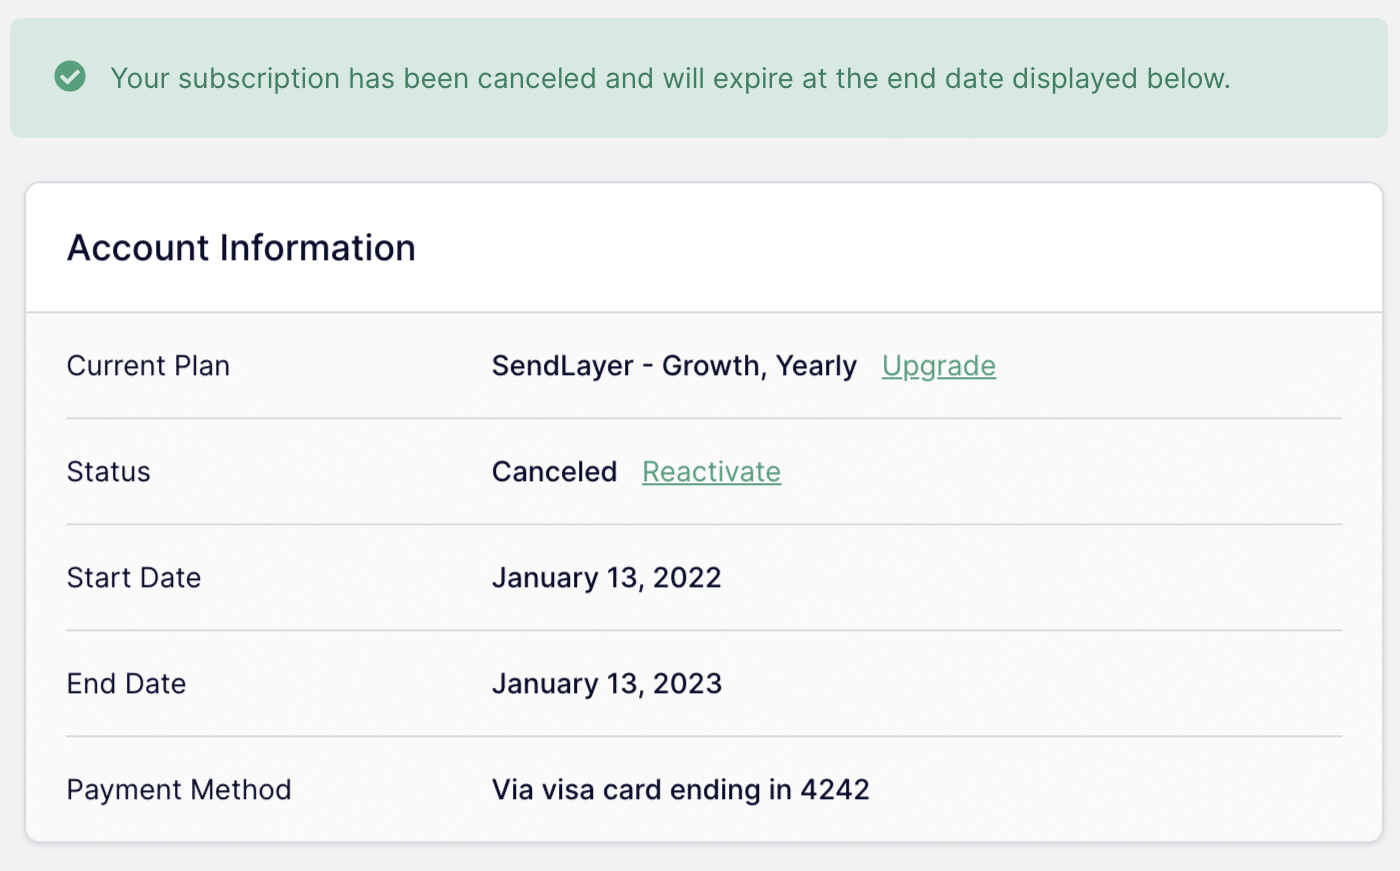 The confirmation message for account cancellation